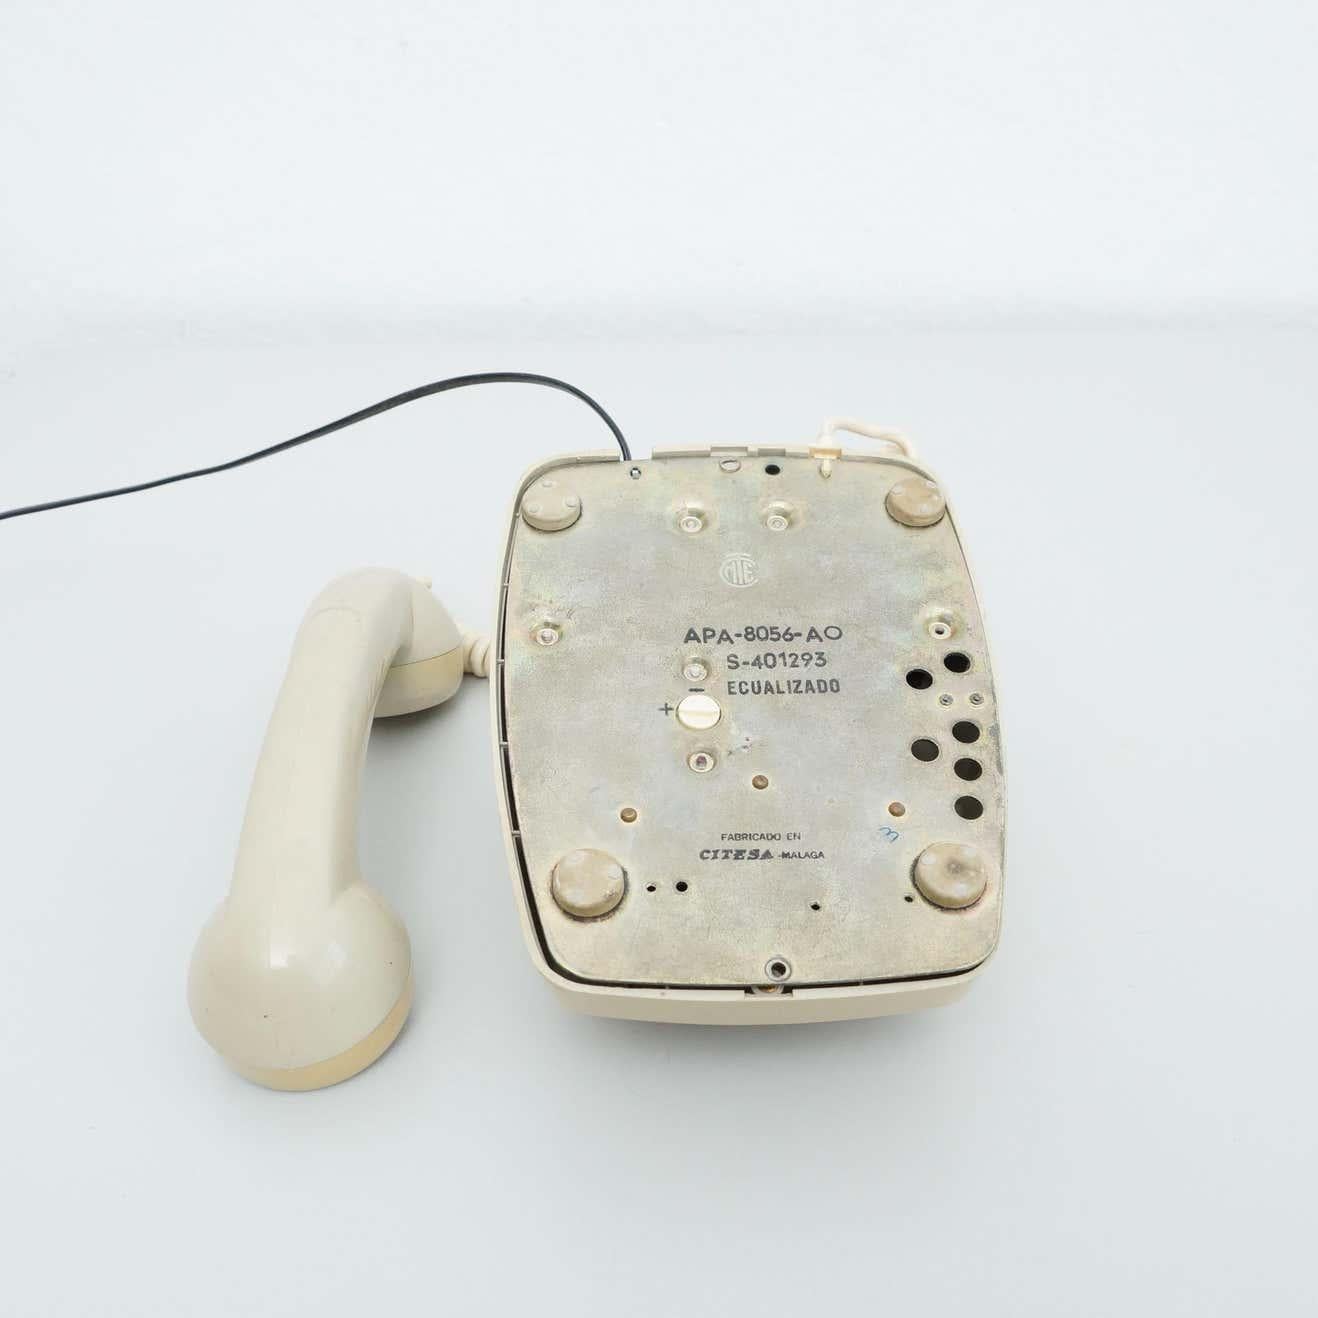 Vintage Spanish Analog Telephone by Telefonica, circa 1980 For Sale 6